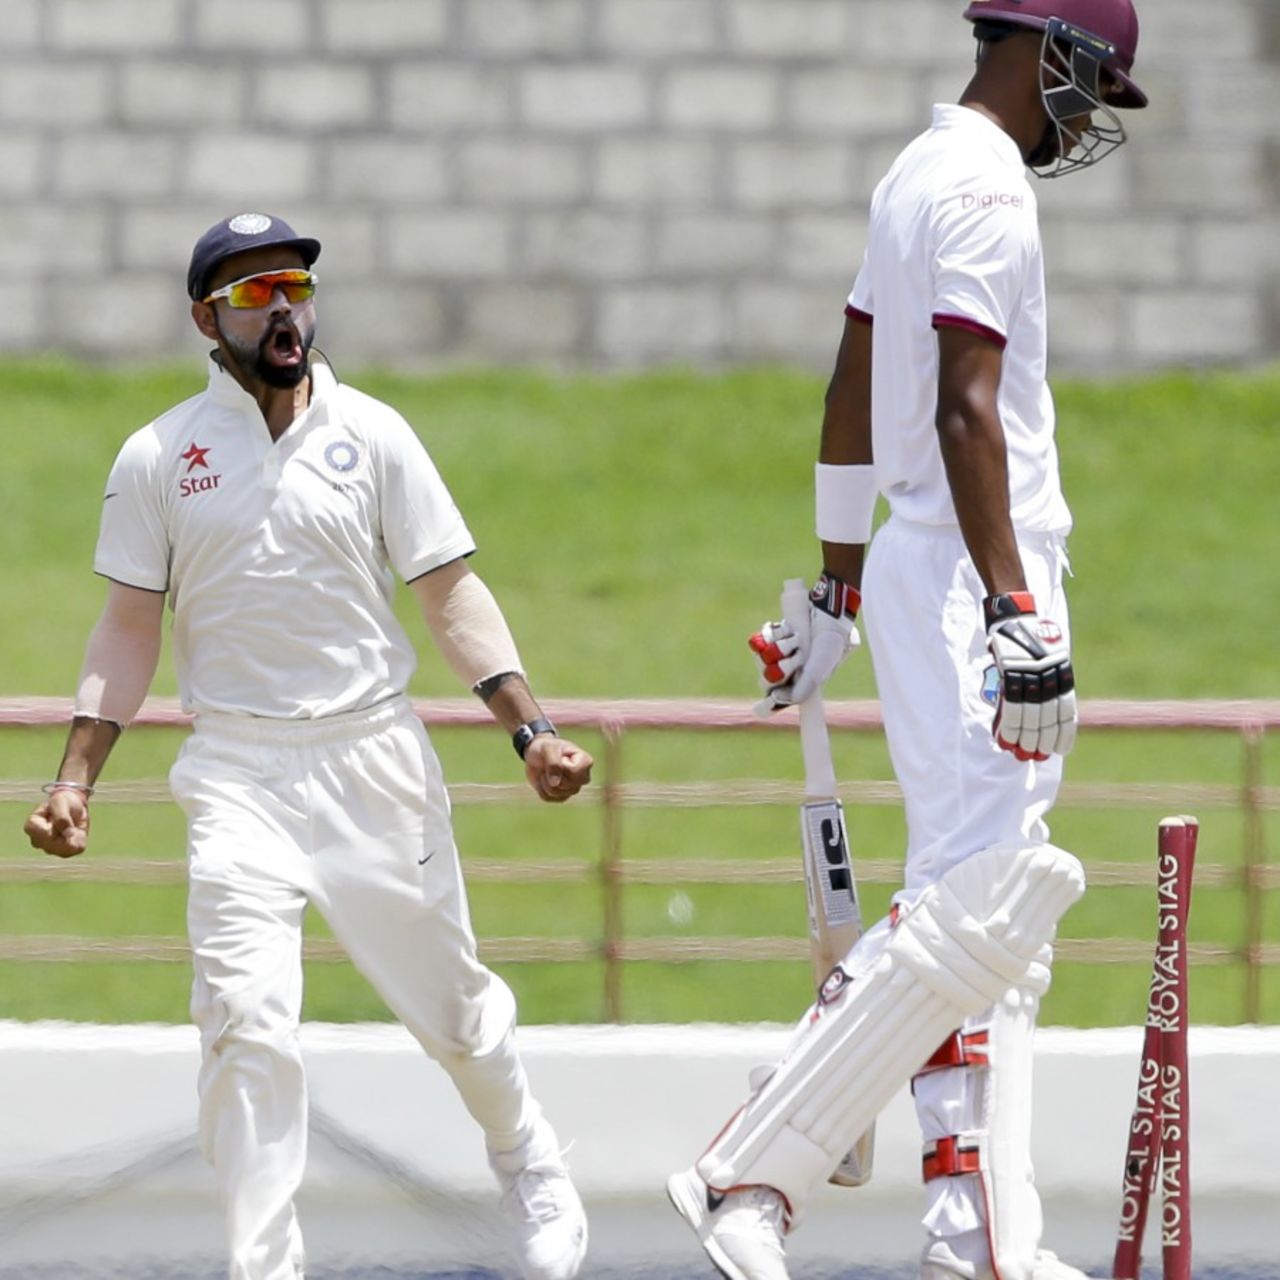 Virat Kohli is ecstatic after the wicket of Roston Chase, West Indies v India, 3rd Test, Gros Islet, 5th day, August 13, 2016